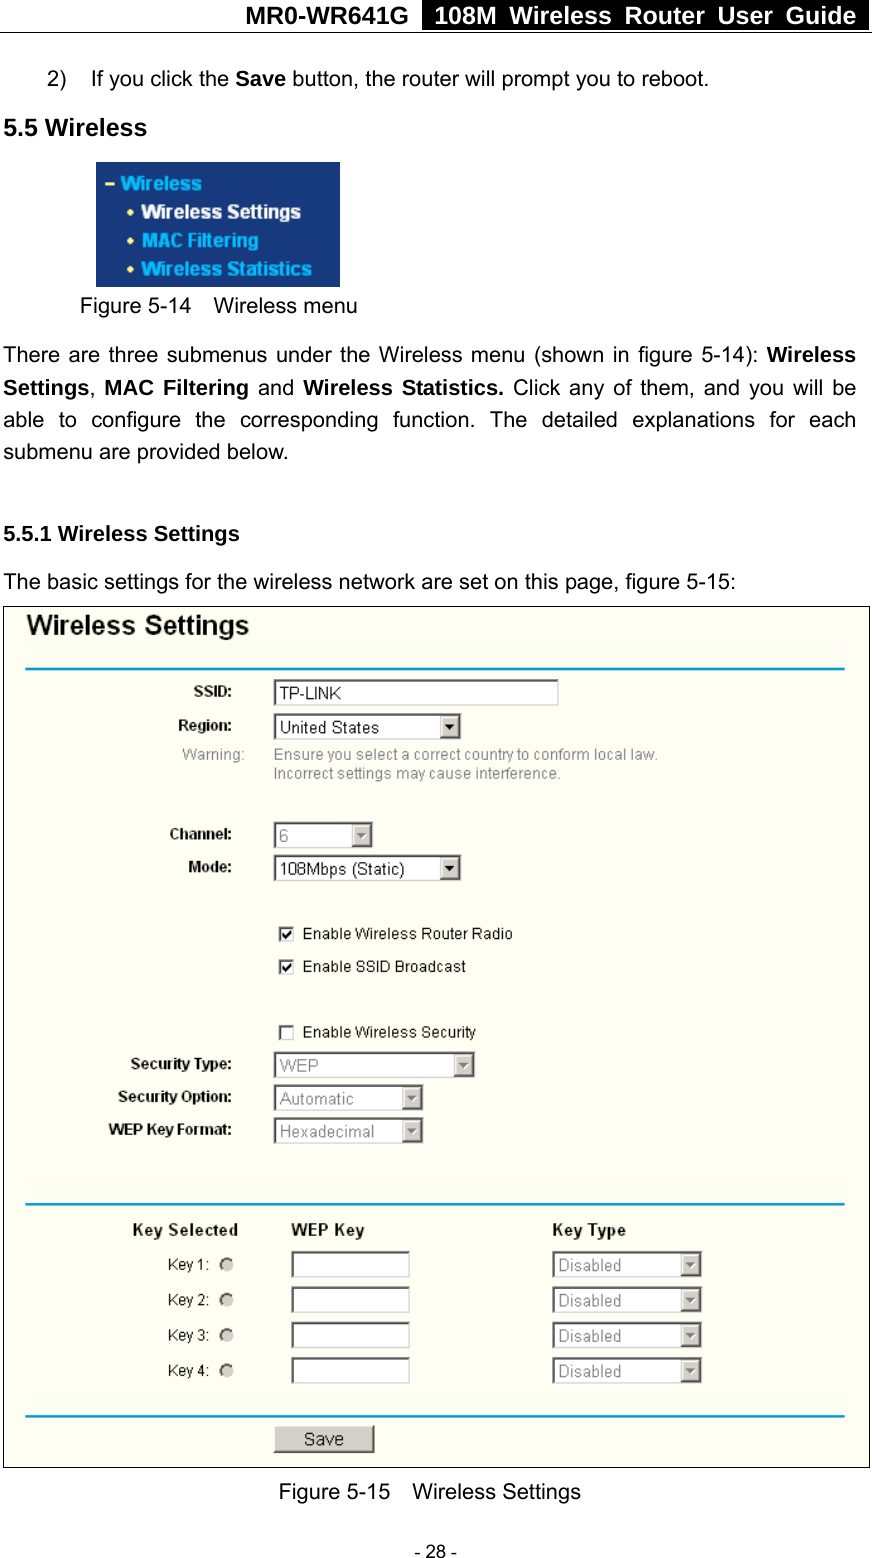 MR0-WR641G   108M Wireless Router User Guide  2)  If you click the Save button, the router will prompt you to reboot. 5.5 Wireless  Figure 5-14  Wireless menu There are three submenus under the Wireless menu (shown in figure 5-14): Wireless Settings, MAC Filtering and Wireless Statistics. Click any of them, and you will be able to configure the corresponding function. The detailed explanations for each submenu are provided below.  5.5.1 Wireless Settings The basic settings for the wireless network are set on this page, figure 5-15:  Figure 5-15  Wireless Settings  - 28 - 